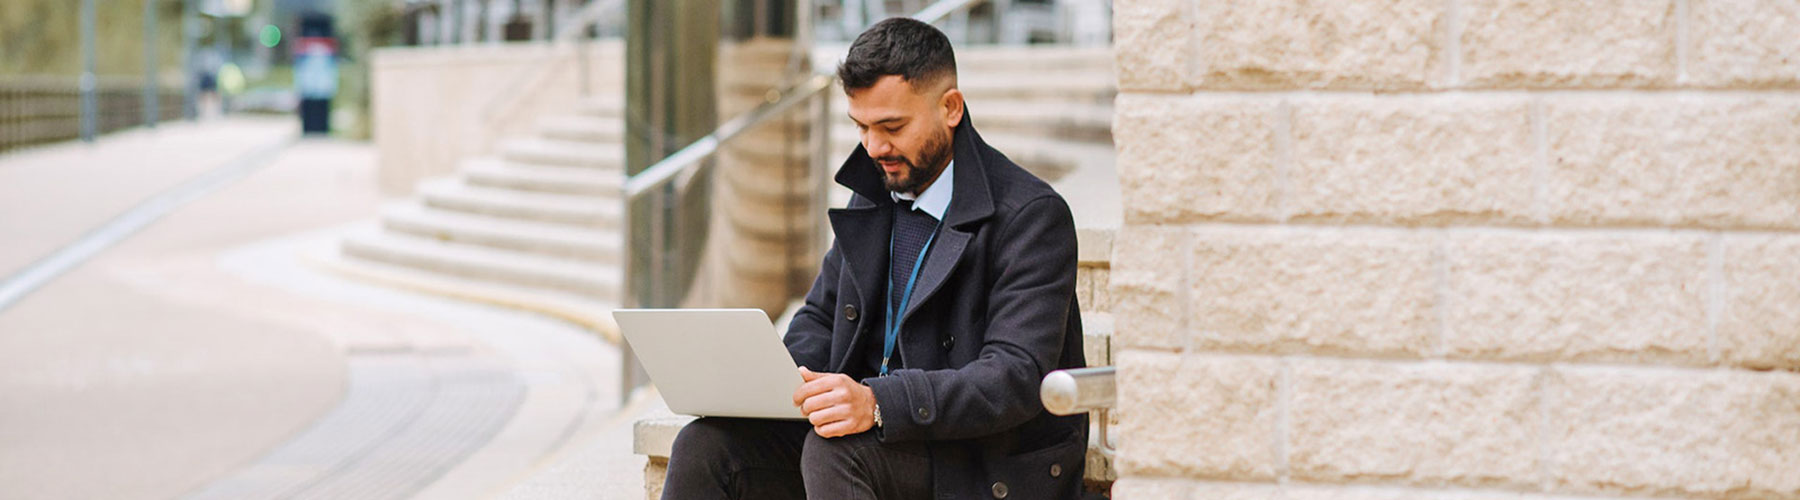 Businessman working on laptop outside on building stairs